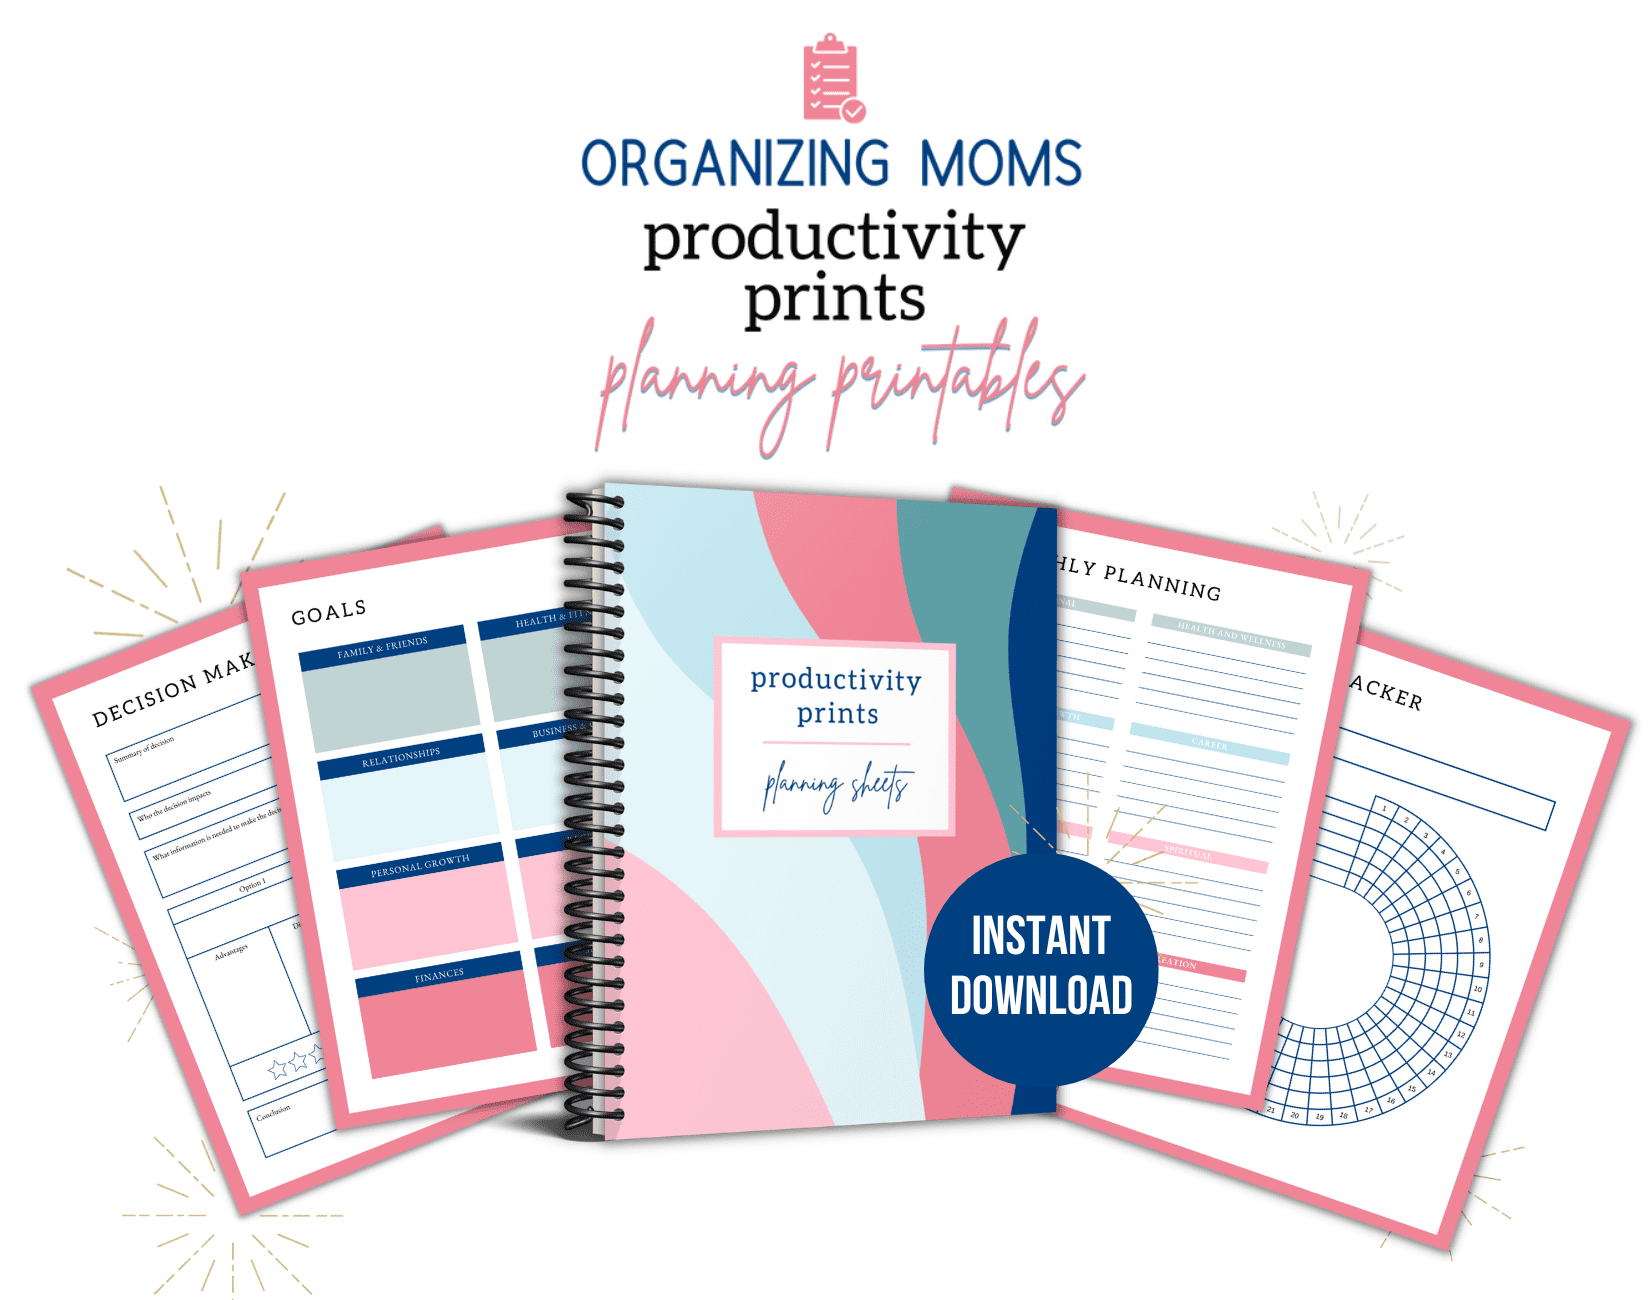 Organizing Moms Productivity Prints Planning Printables (text) Image of printables on white background